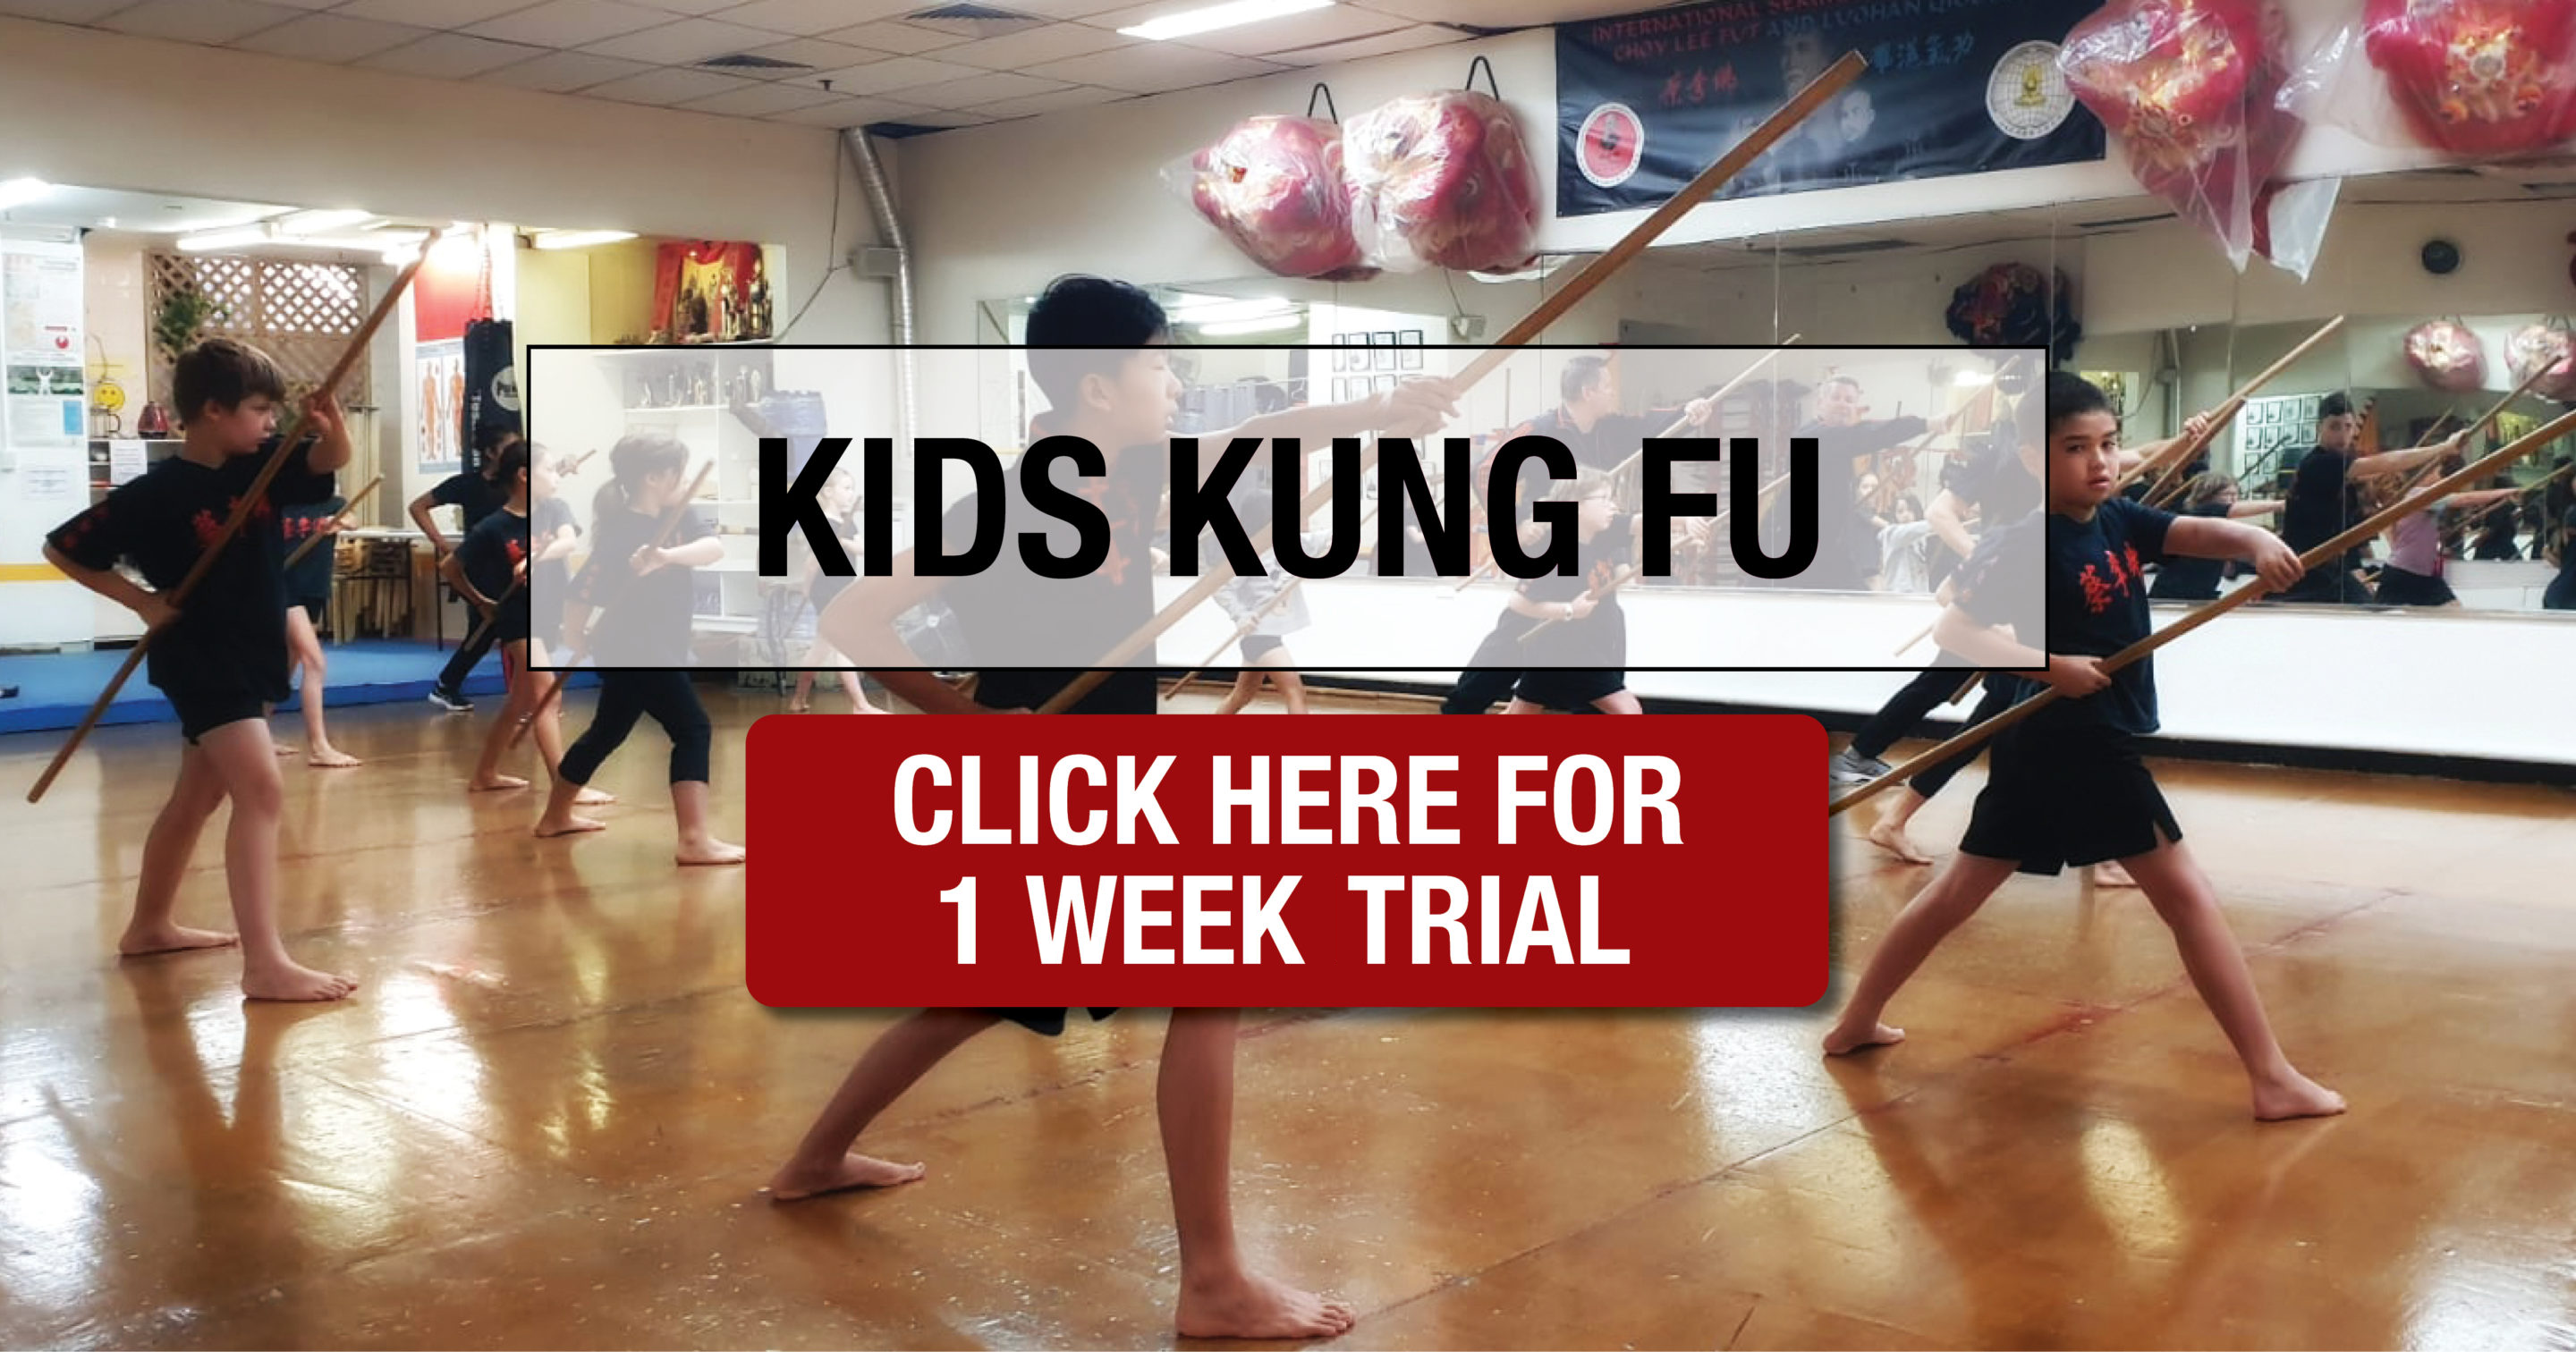 Kids class - click for 1 week trial